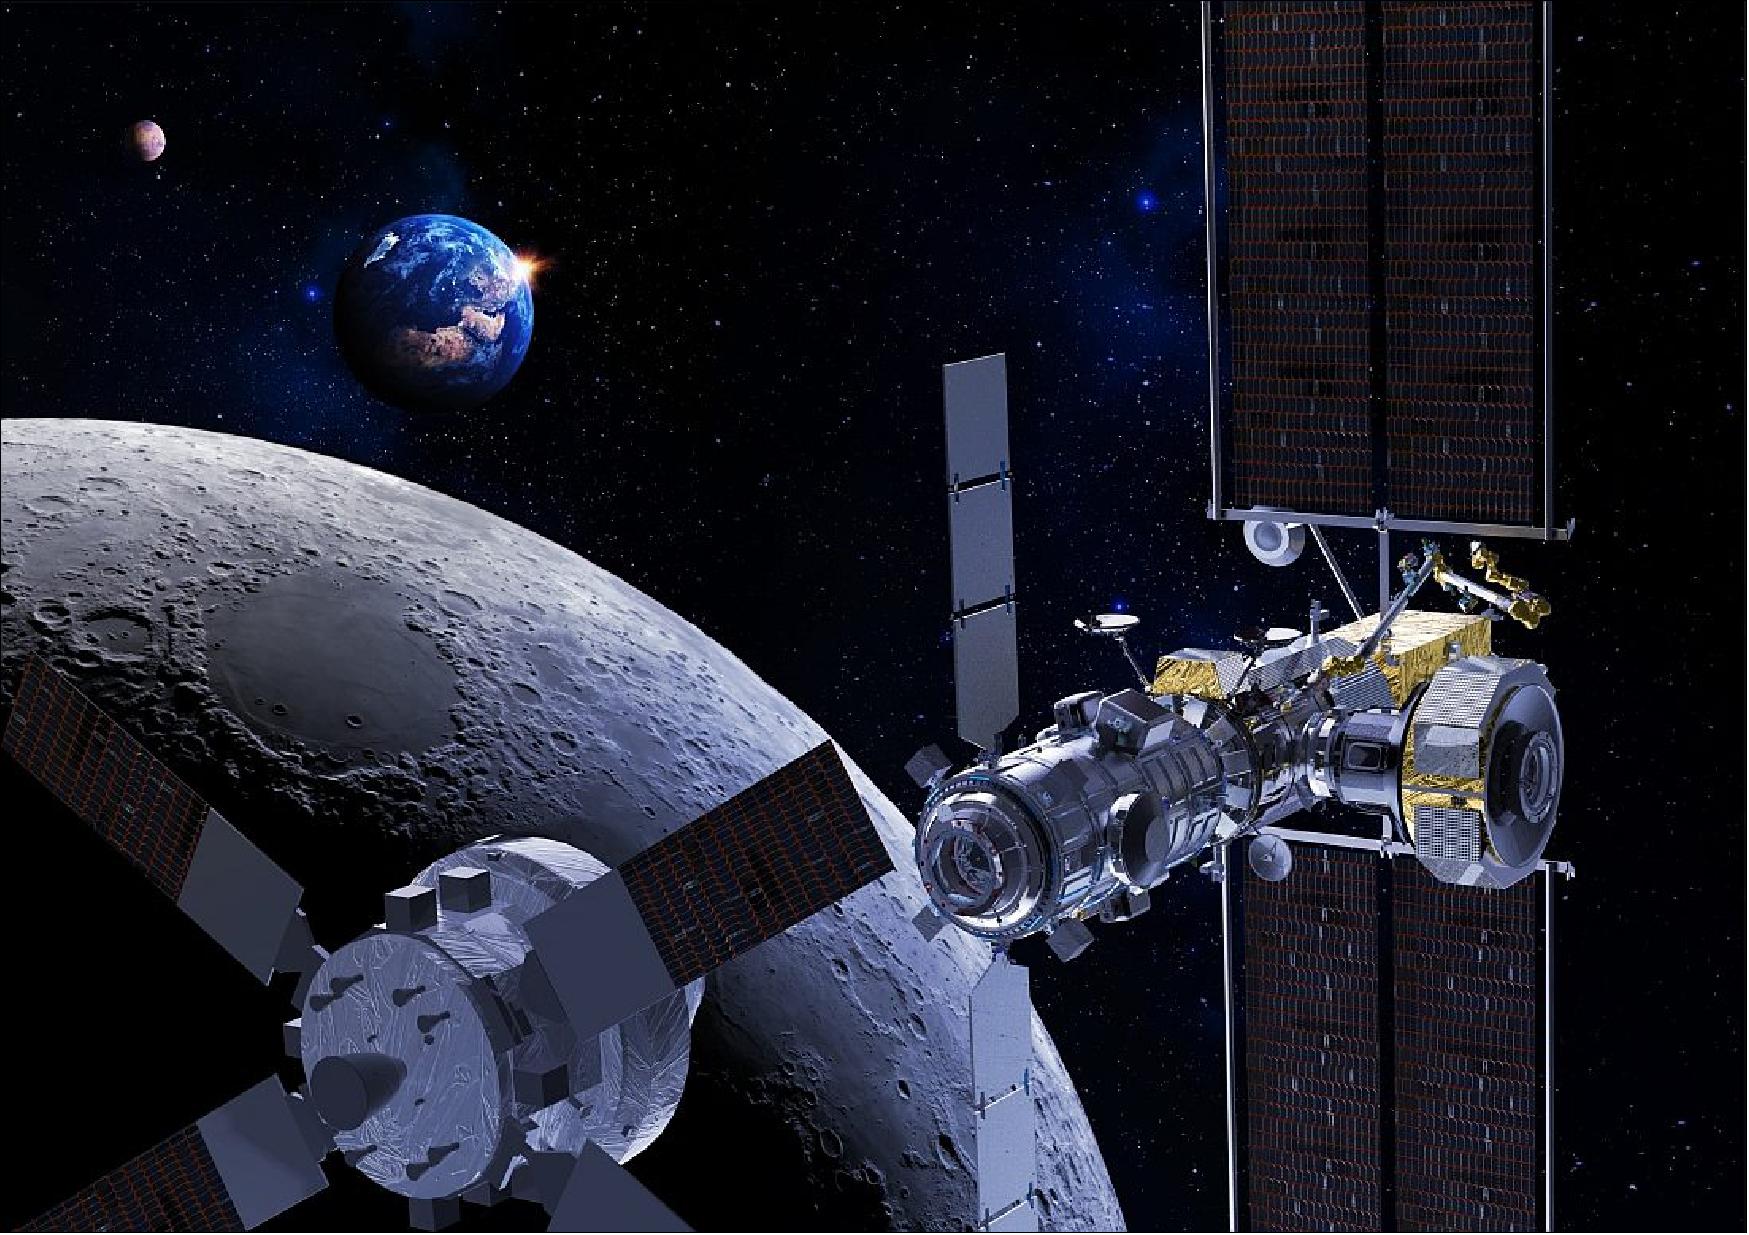 Figure 14: Gateway with Orion docking over Moon. Thales Alenia Space won ESA contracts to build the I-HAB international habitation module and ESPRIT refueling and telecommunications element for the lunar Gateway (image credit: Thales Alenia Space)